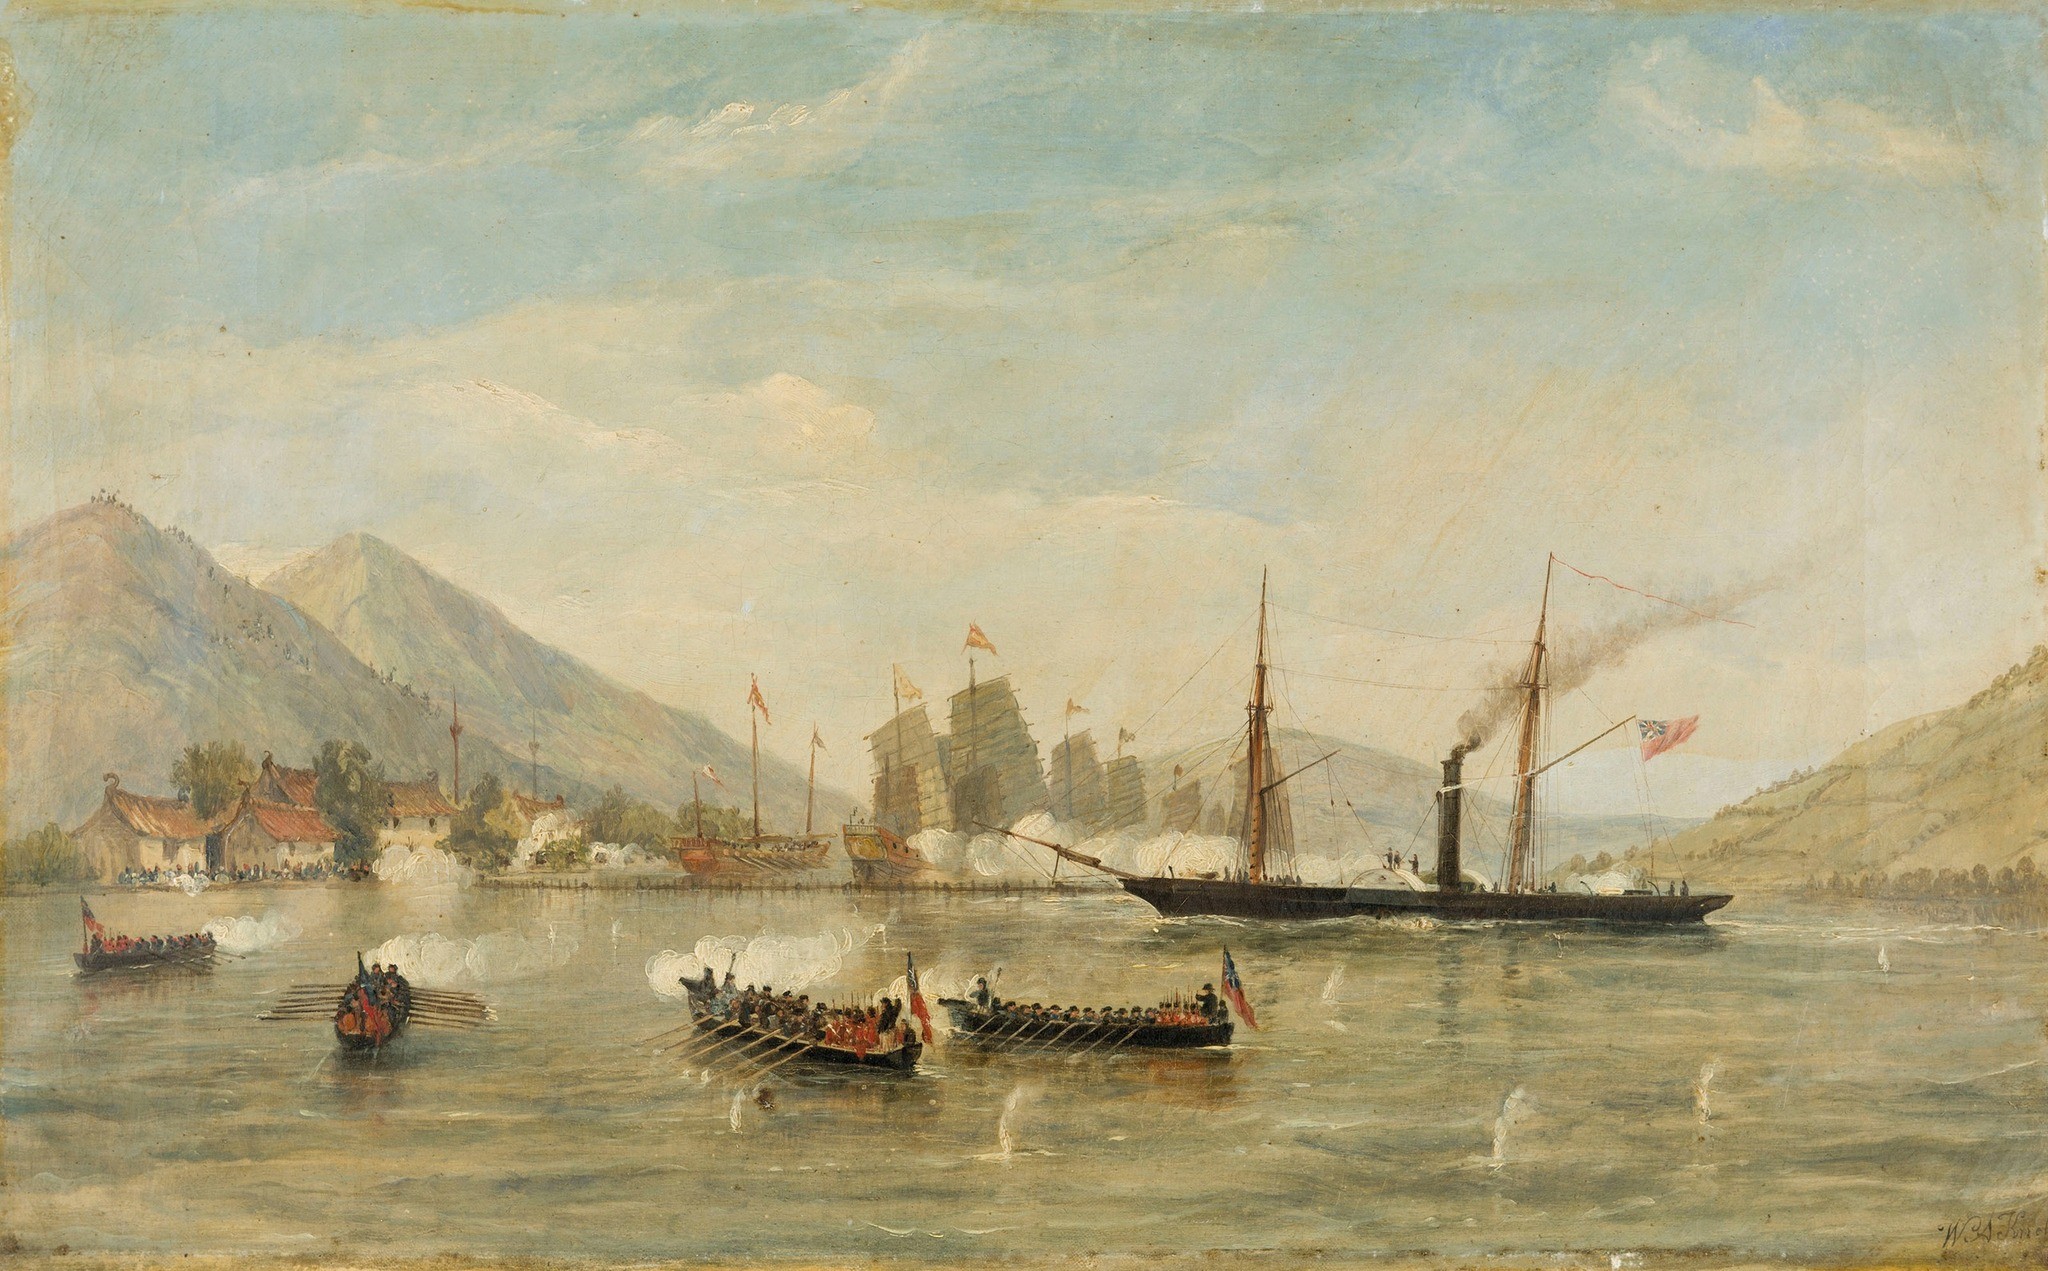 William Adolphus Knell (UK) HEIC ‘Nemesis’ and boats attacking a masked Battery, February 23rd 1841.jpg